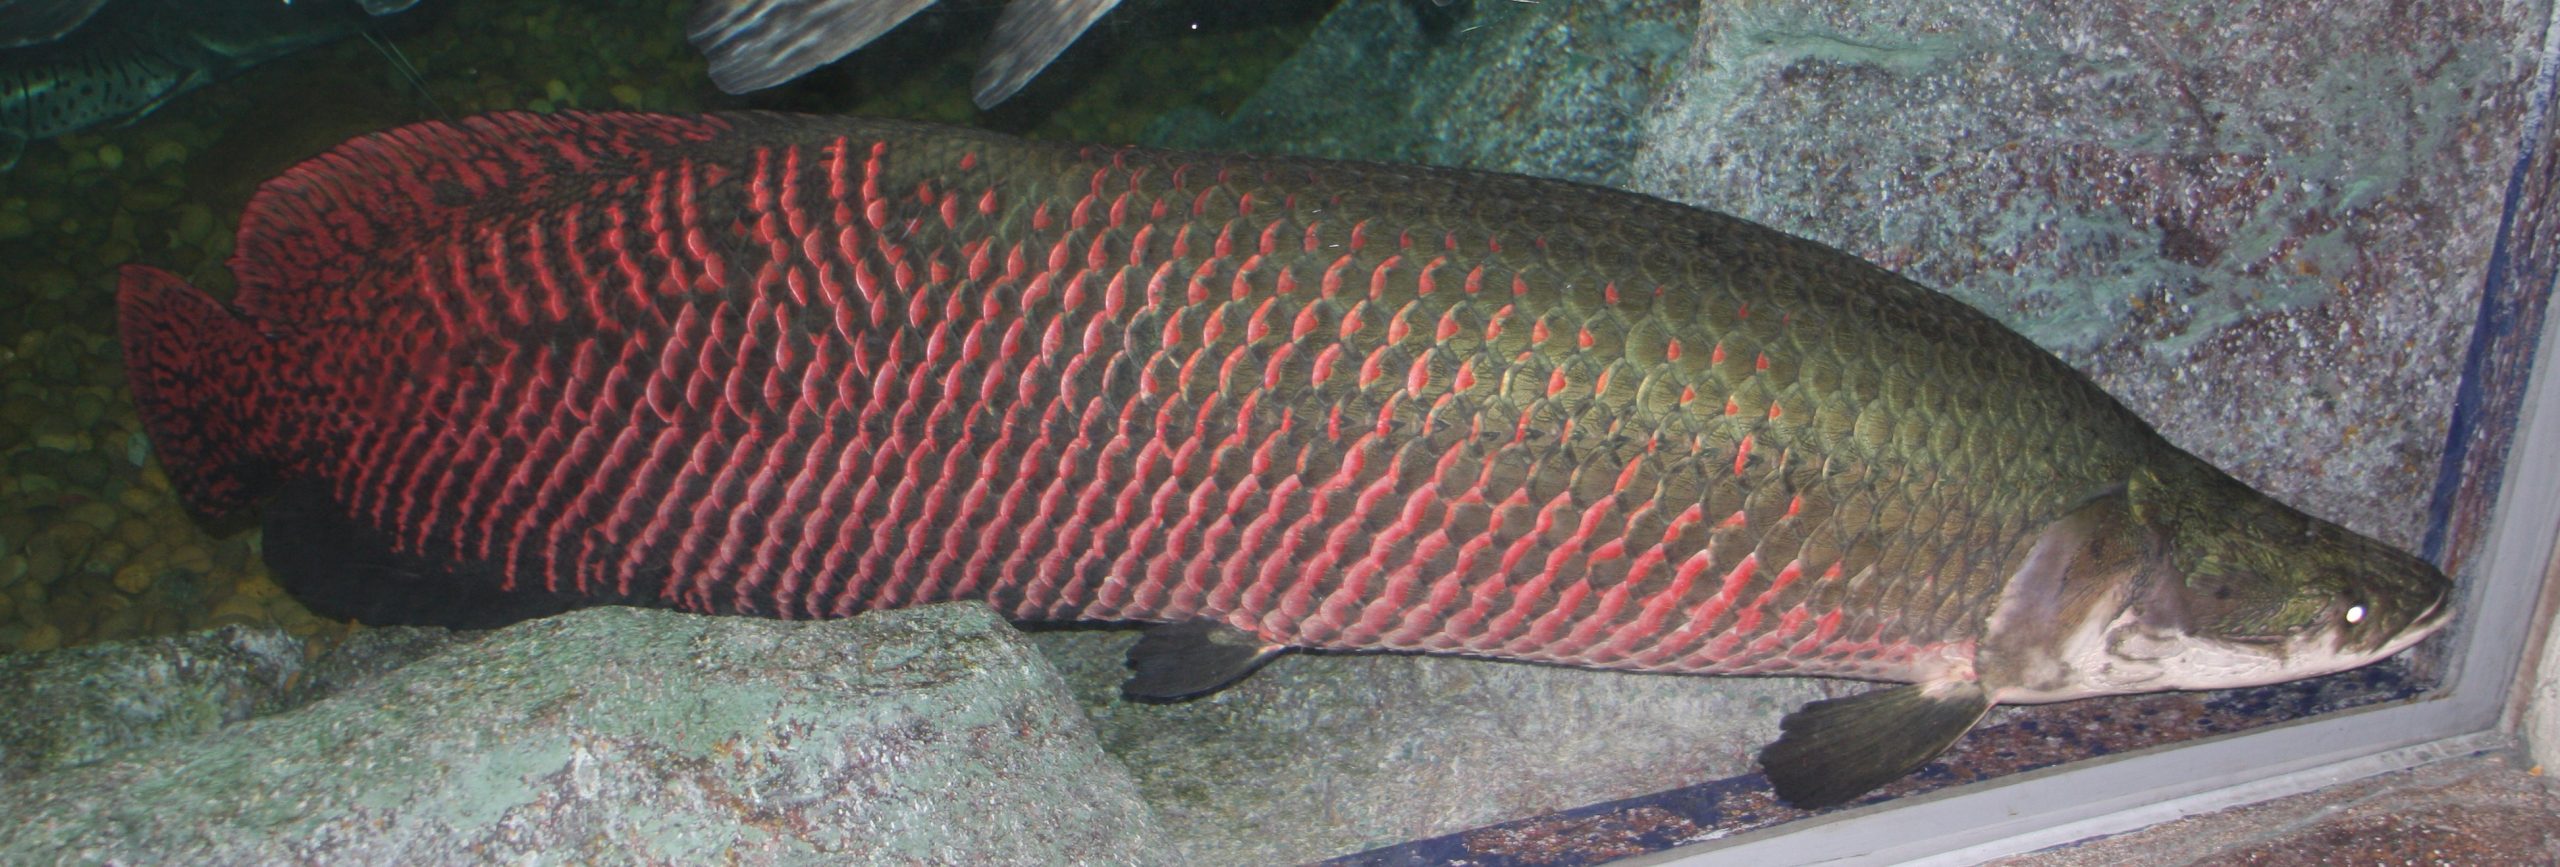 Integrating Fishers in the Management of Arapaima – Fish, Fishing